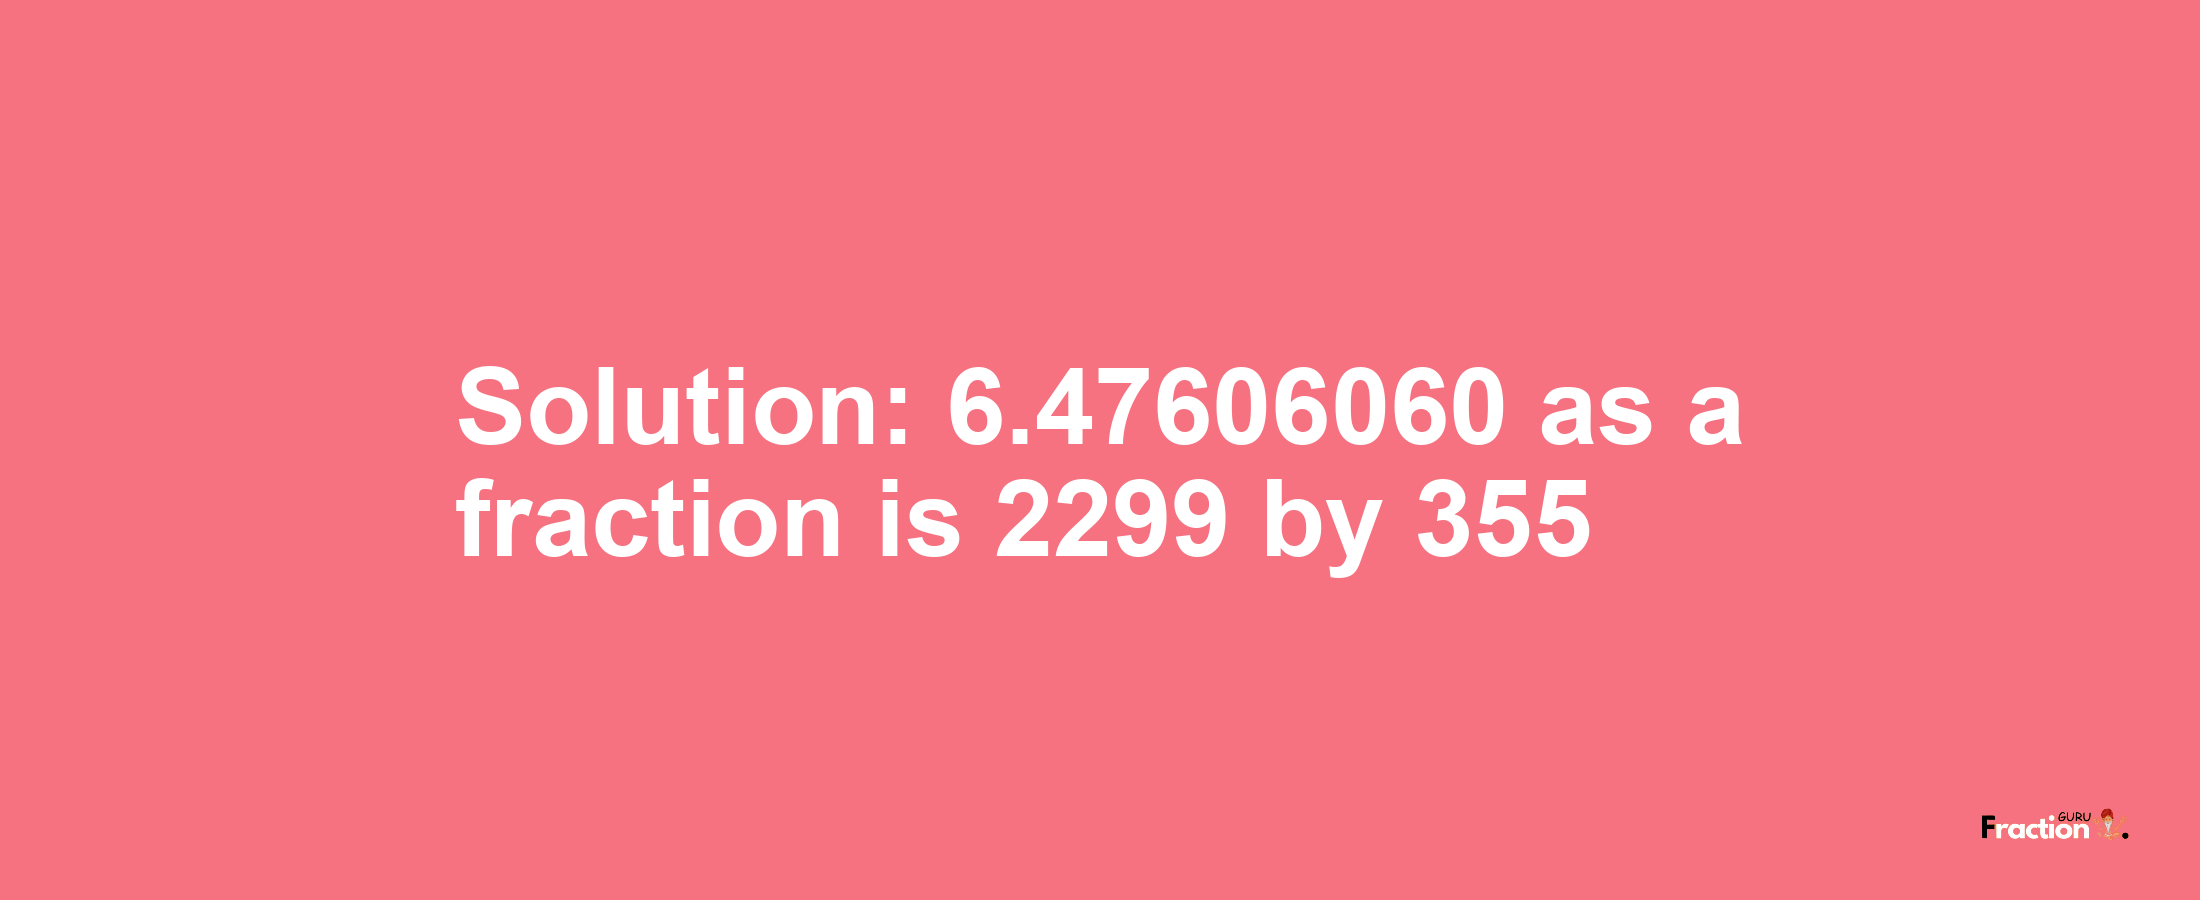 Solution:6.47606060 as a fraction is 2299/355